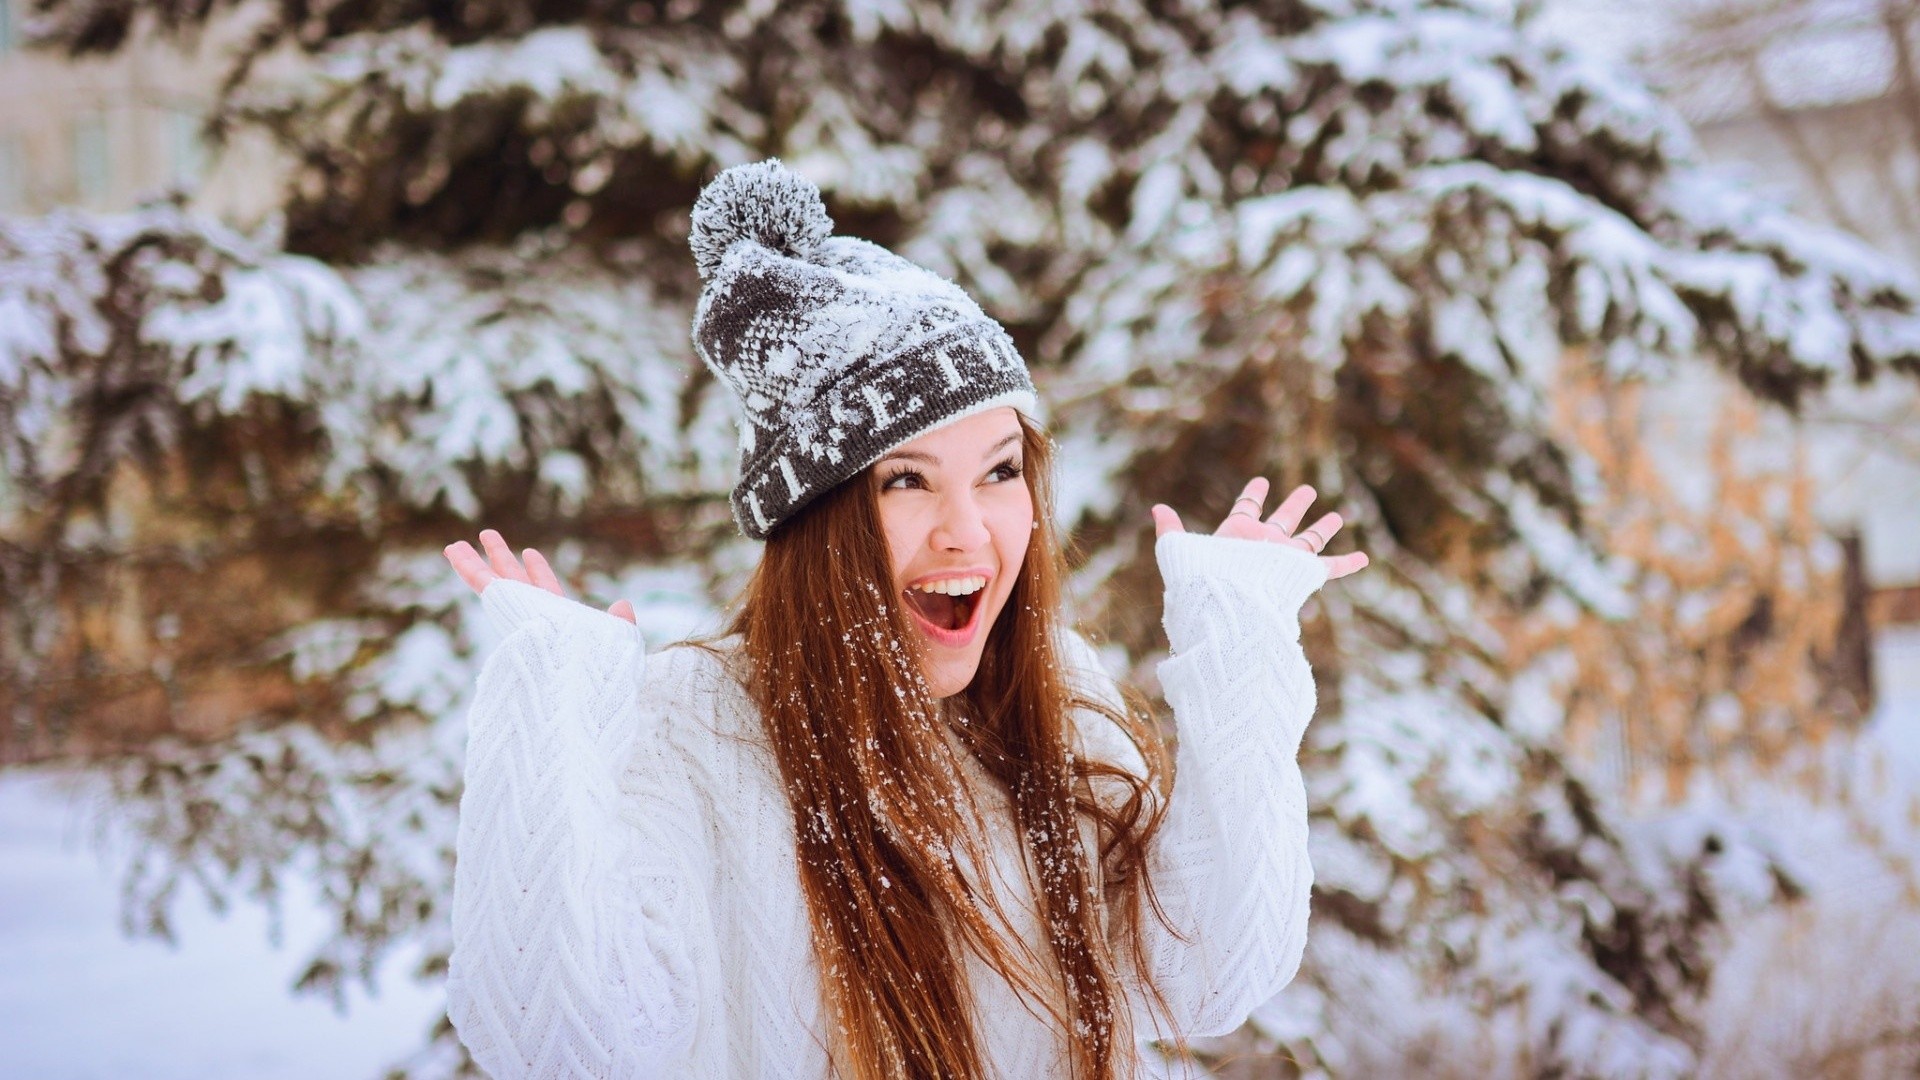 People 1920x1080 women model redhead long hair women outdoors hat open mouth winter snow pine trees sweater looking up screaming white sweater wool cap happy white clothing young women